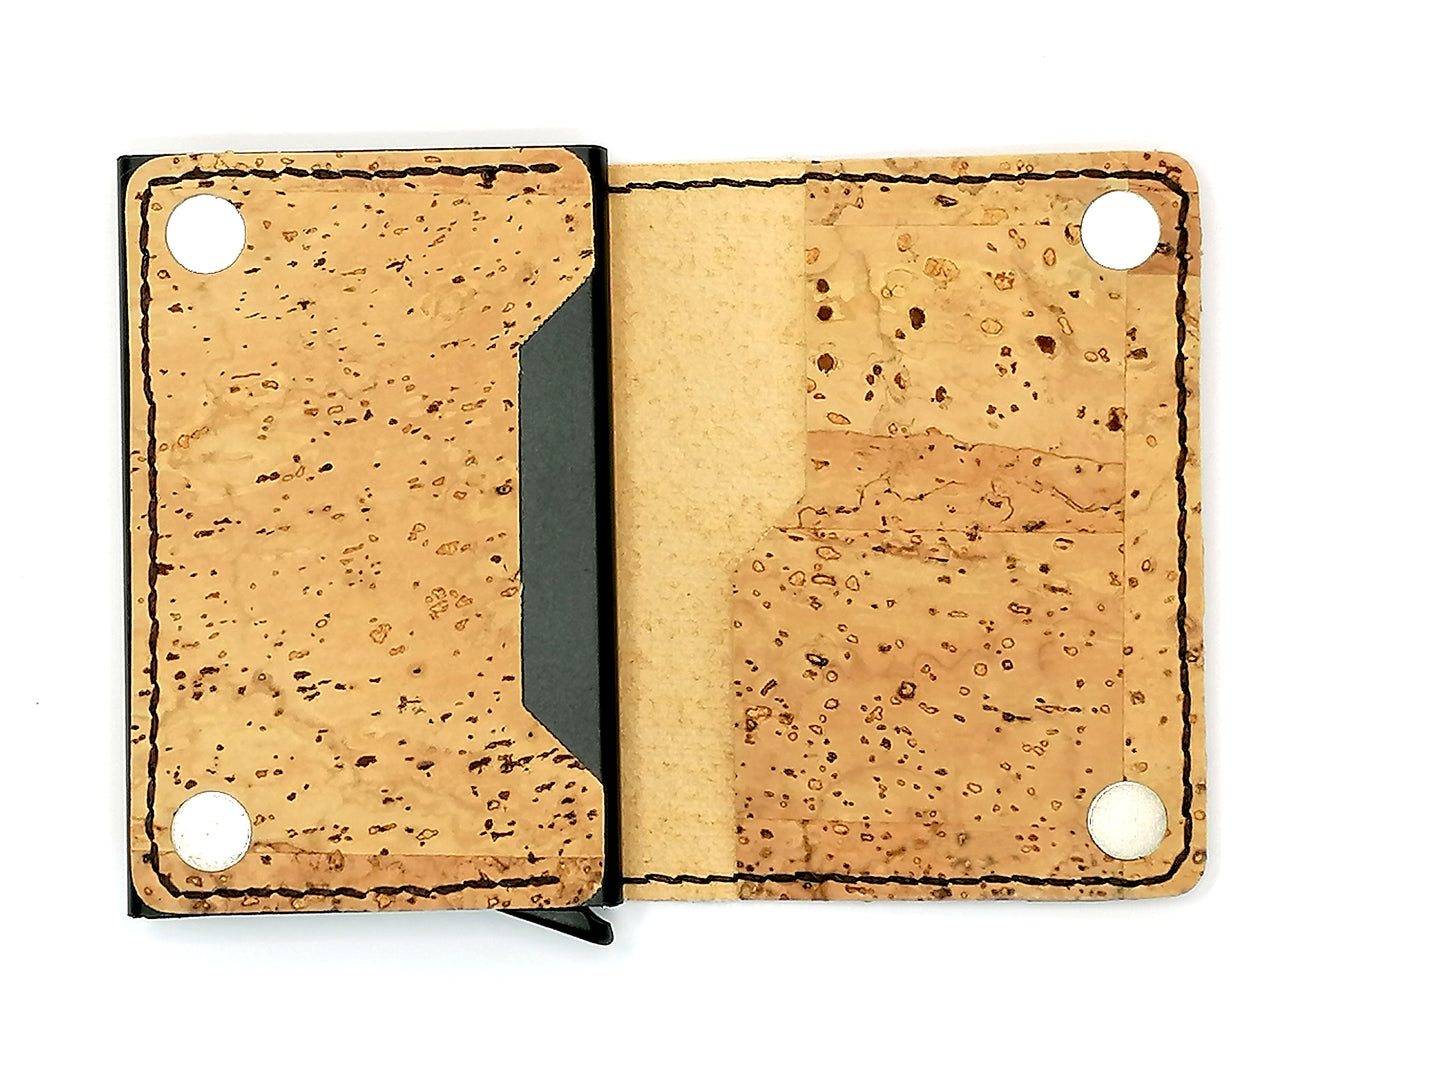 Natural Cork Wallet with RFID Security Holder